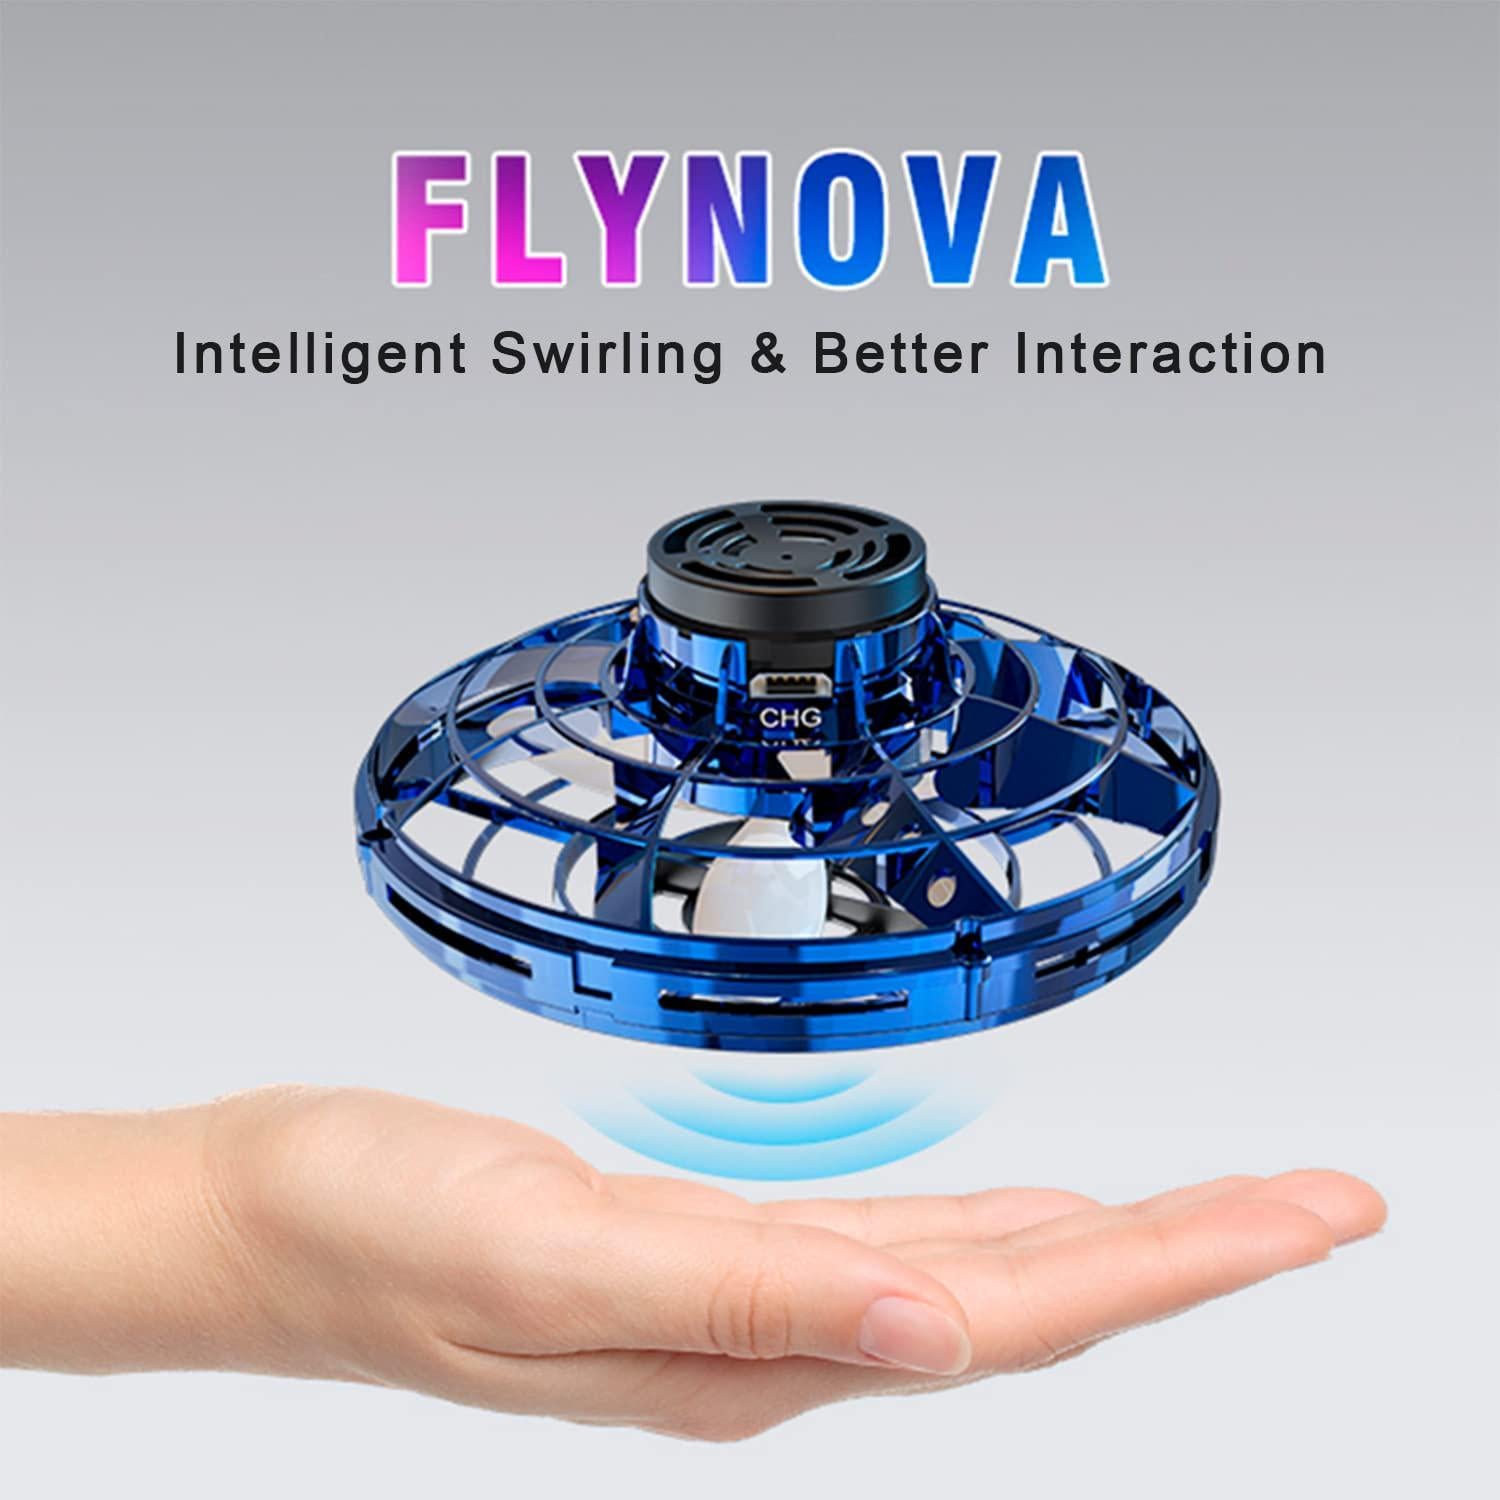 FLYNOVA, FLYNOVA Hand Operated Drones,Mini Flying Ball Toys,Helicopter Toys with 360° Rotating and Shining LED Lights for Kids Adults Outdoor Fun (Blue)